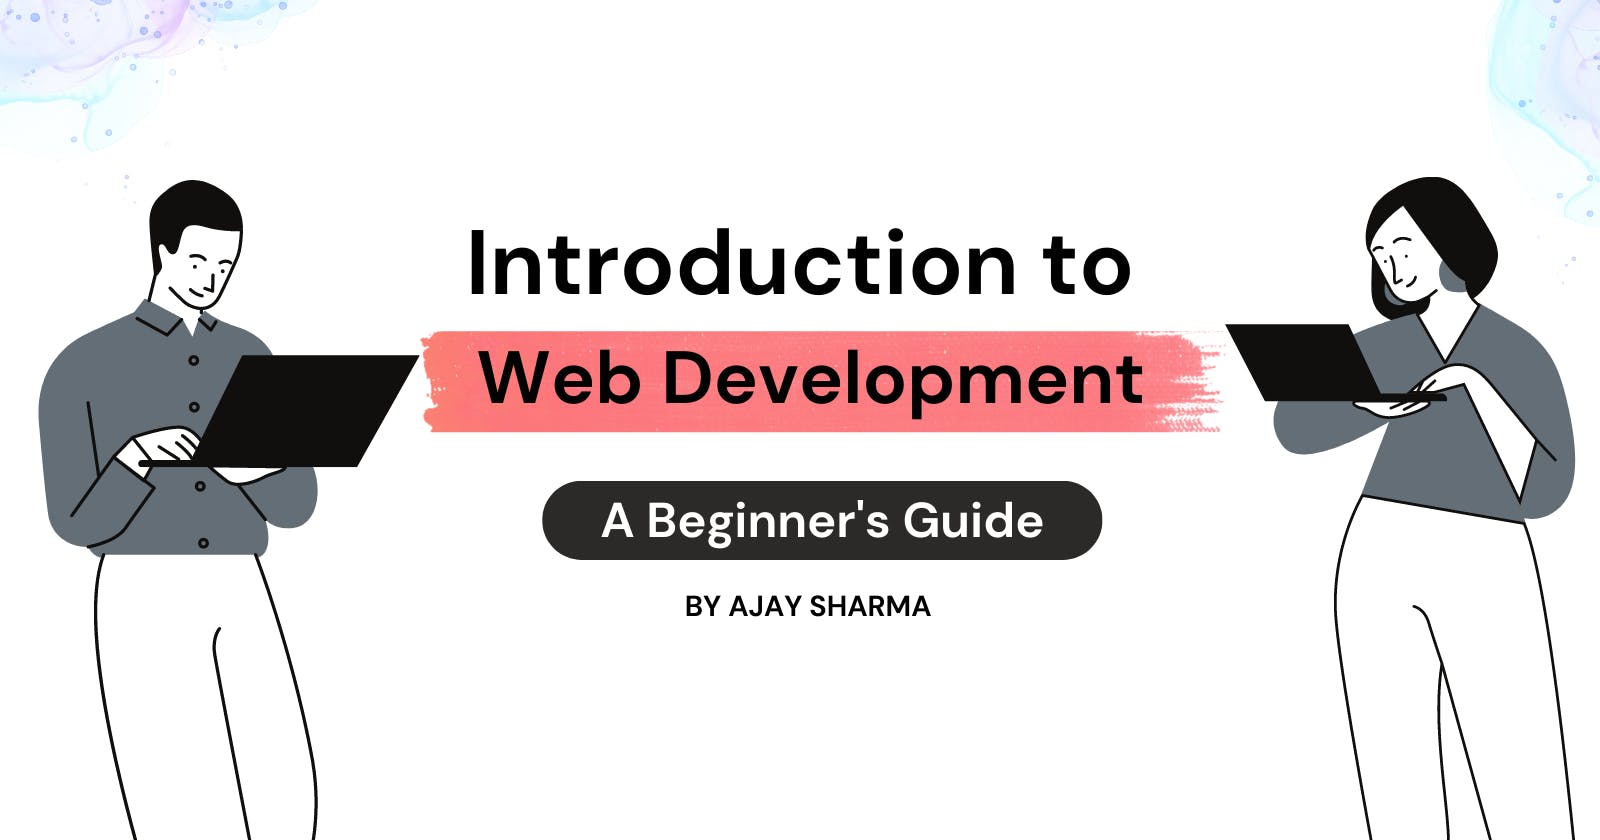 Introduction to Web Development: A Beginner's Guide